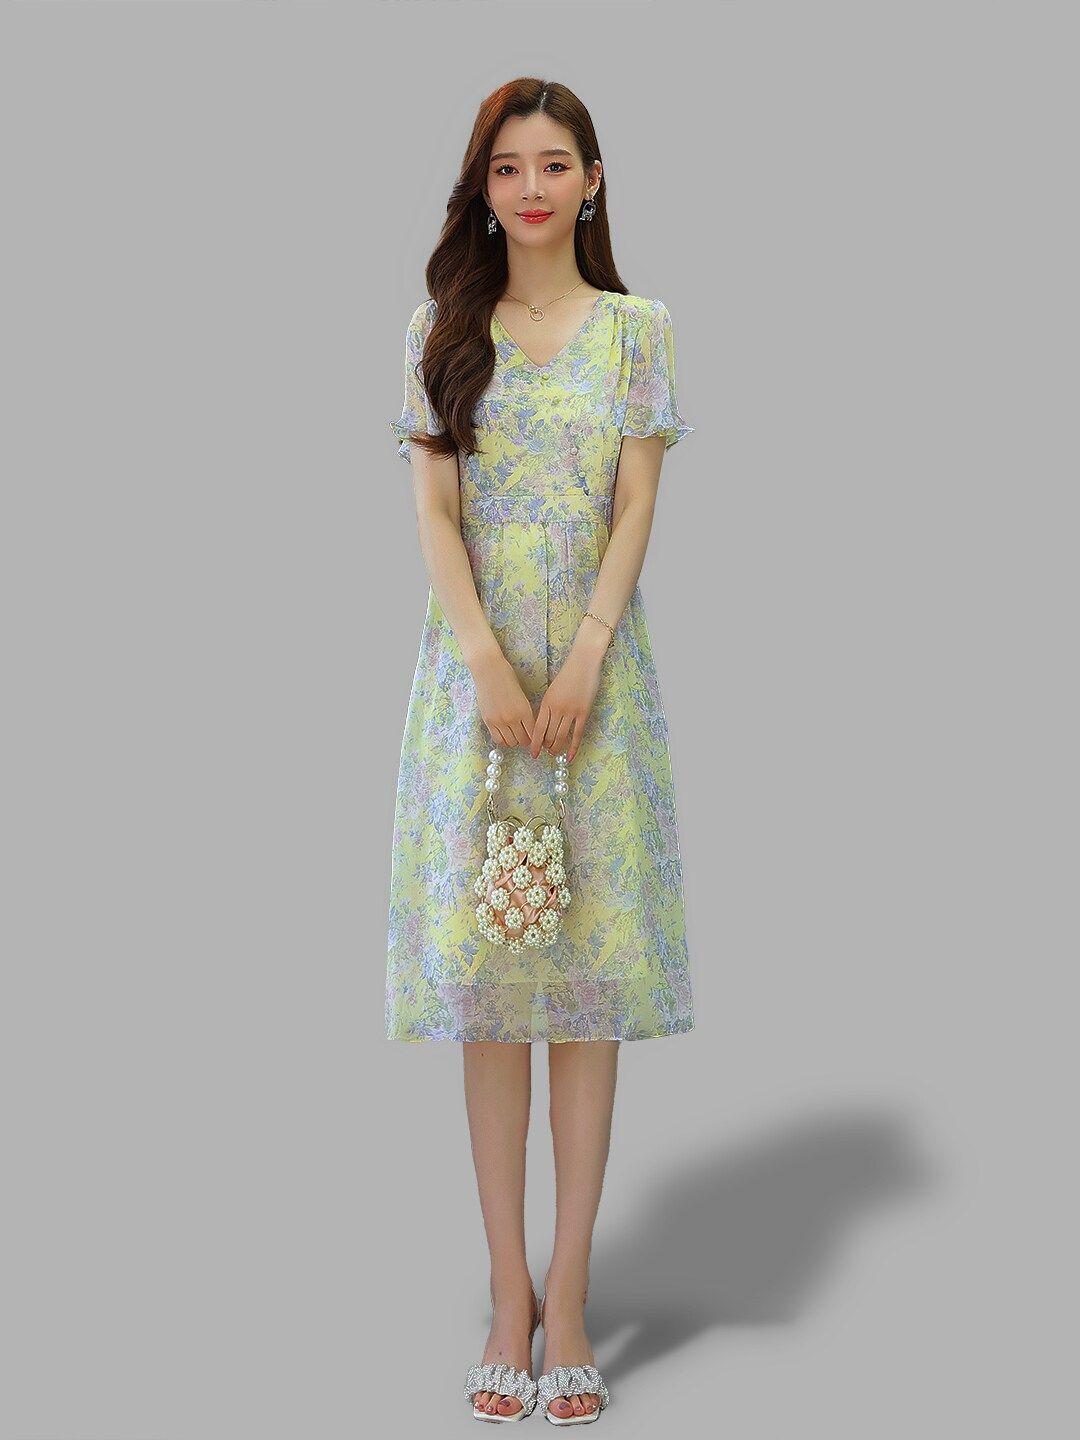 jc collection multicoloured floral dress